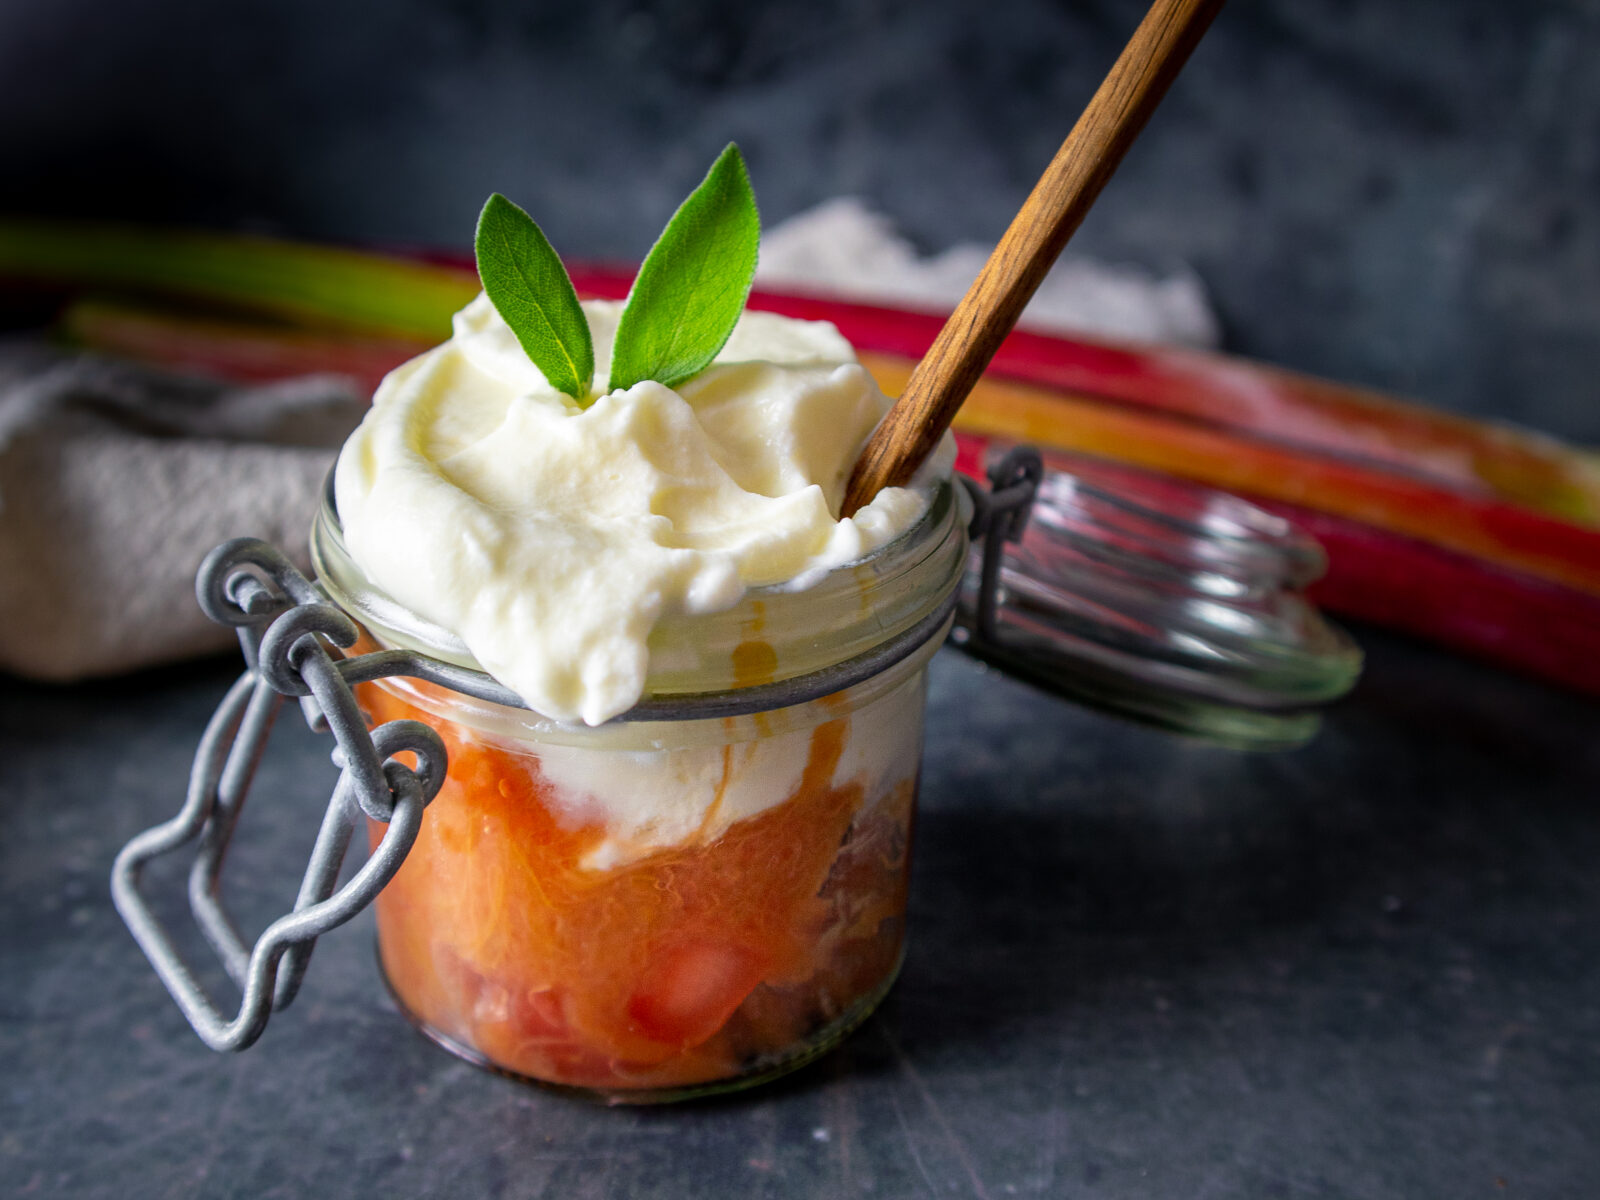 Rhubarb compote in a jar, topped with cream